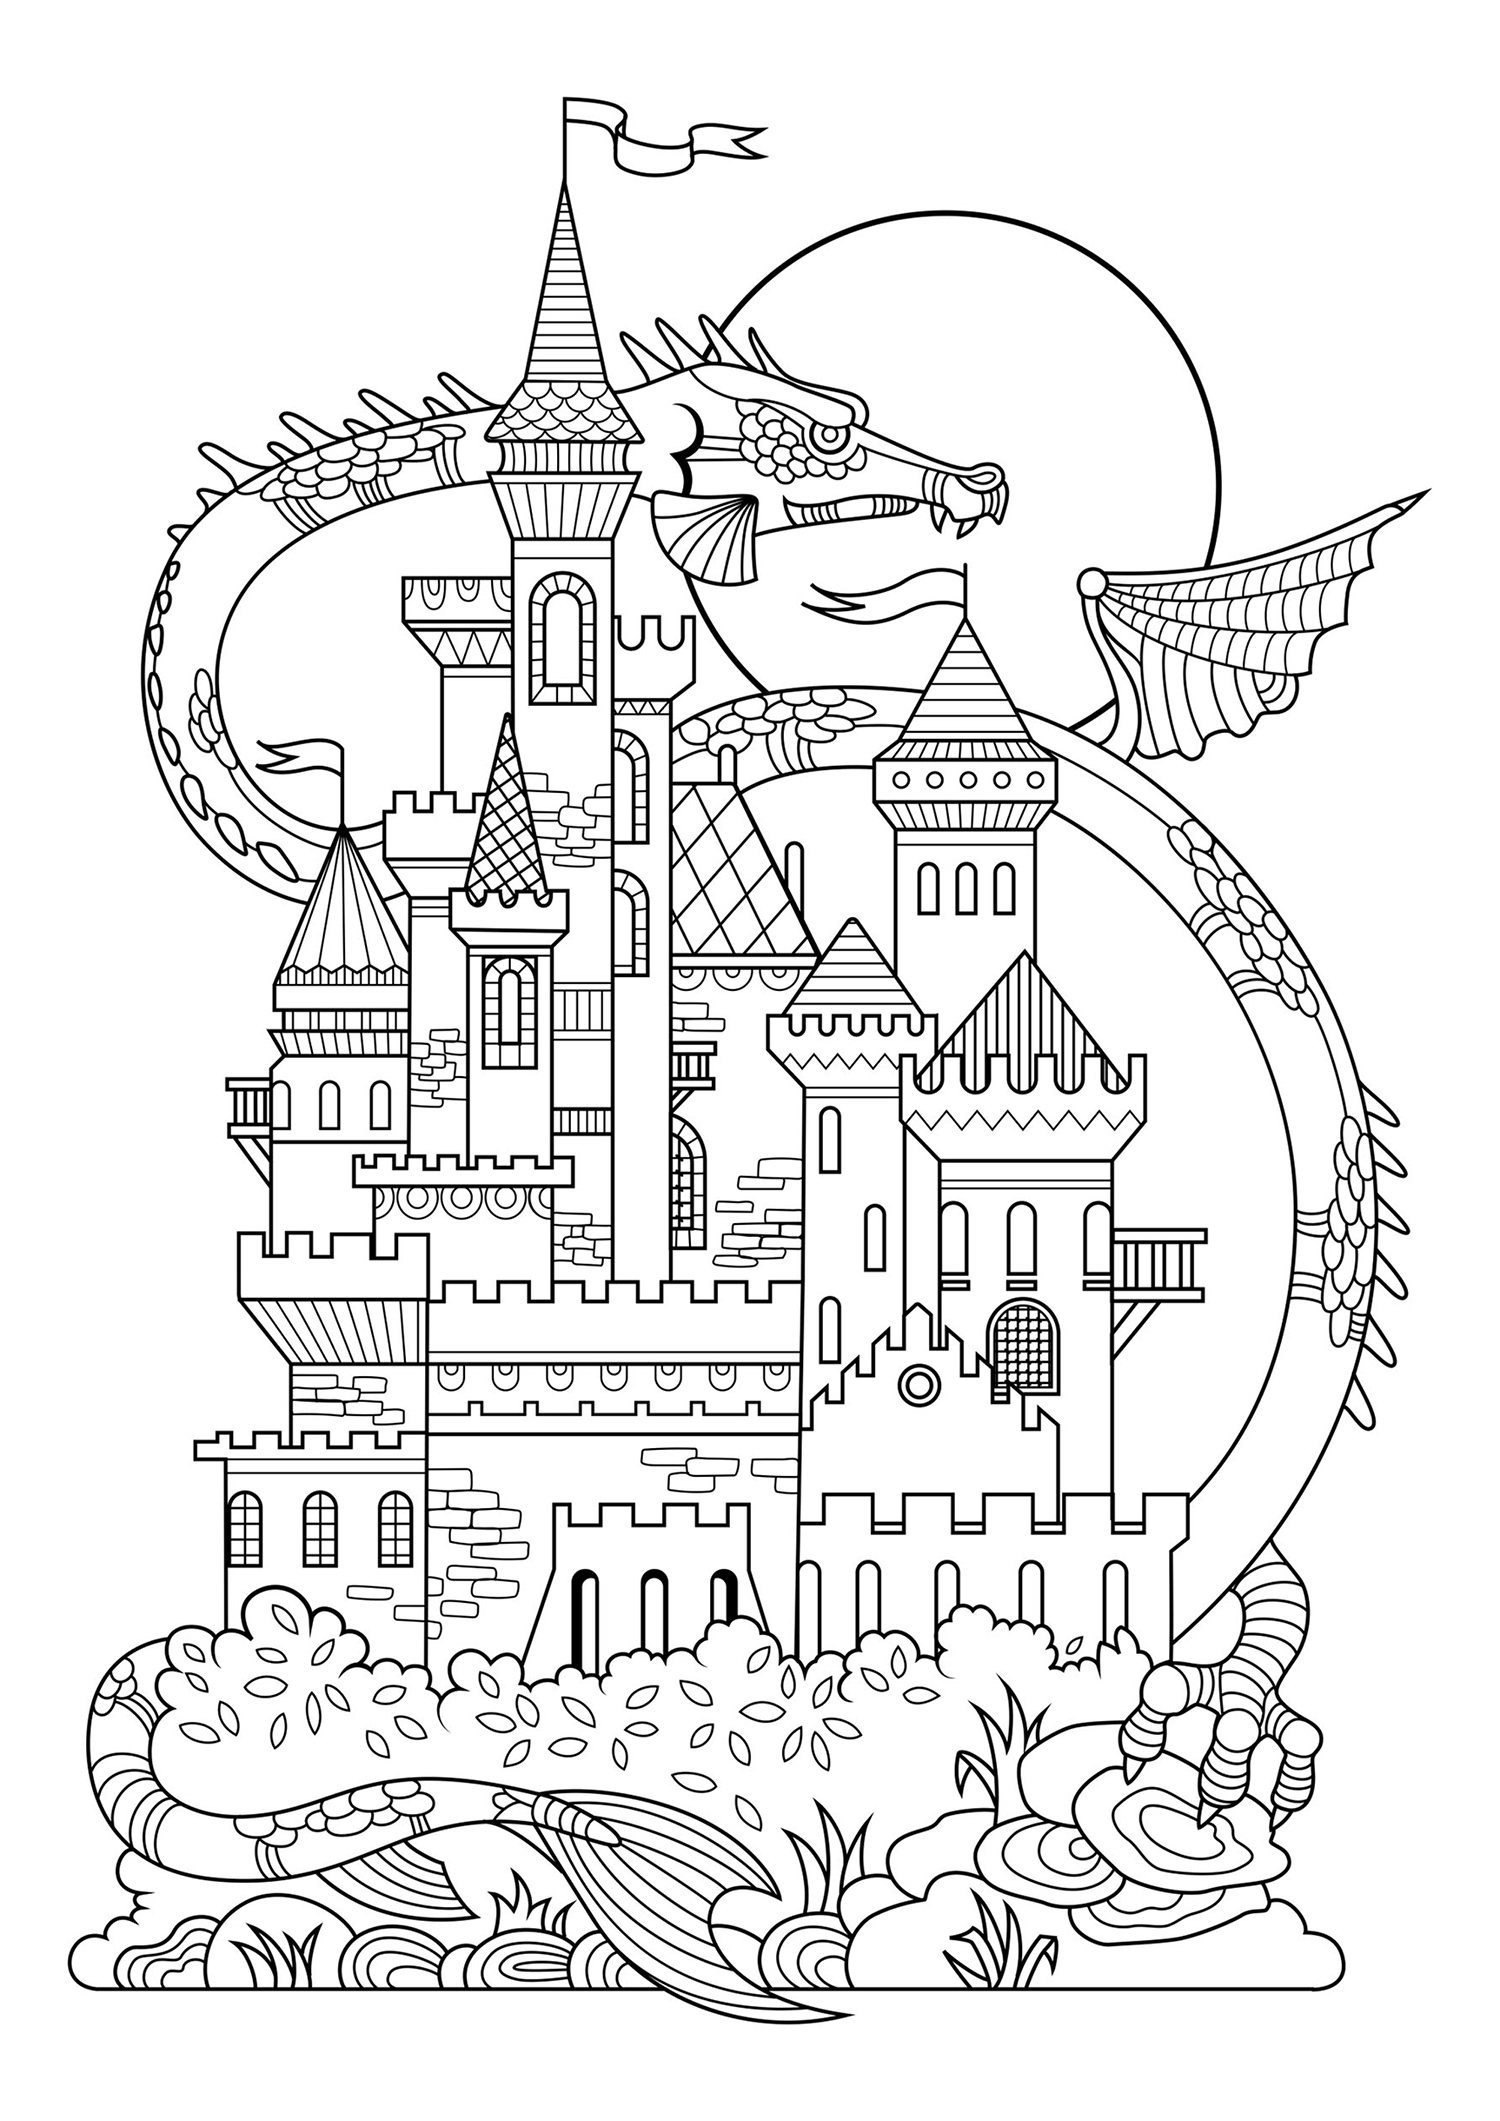 Castle and dragon - Image with : Castle